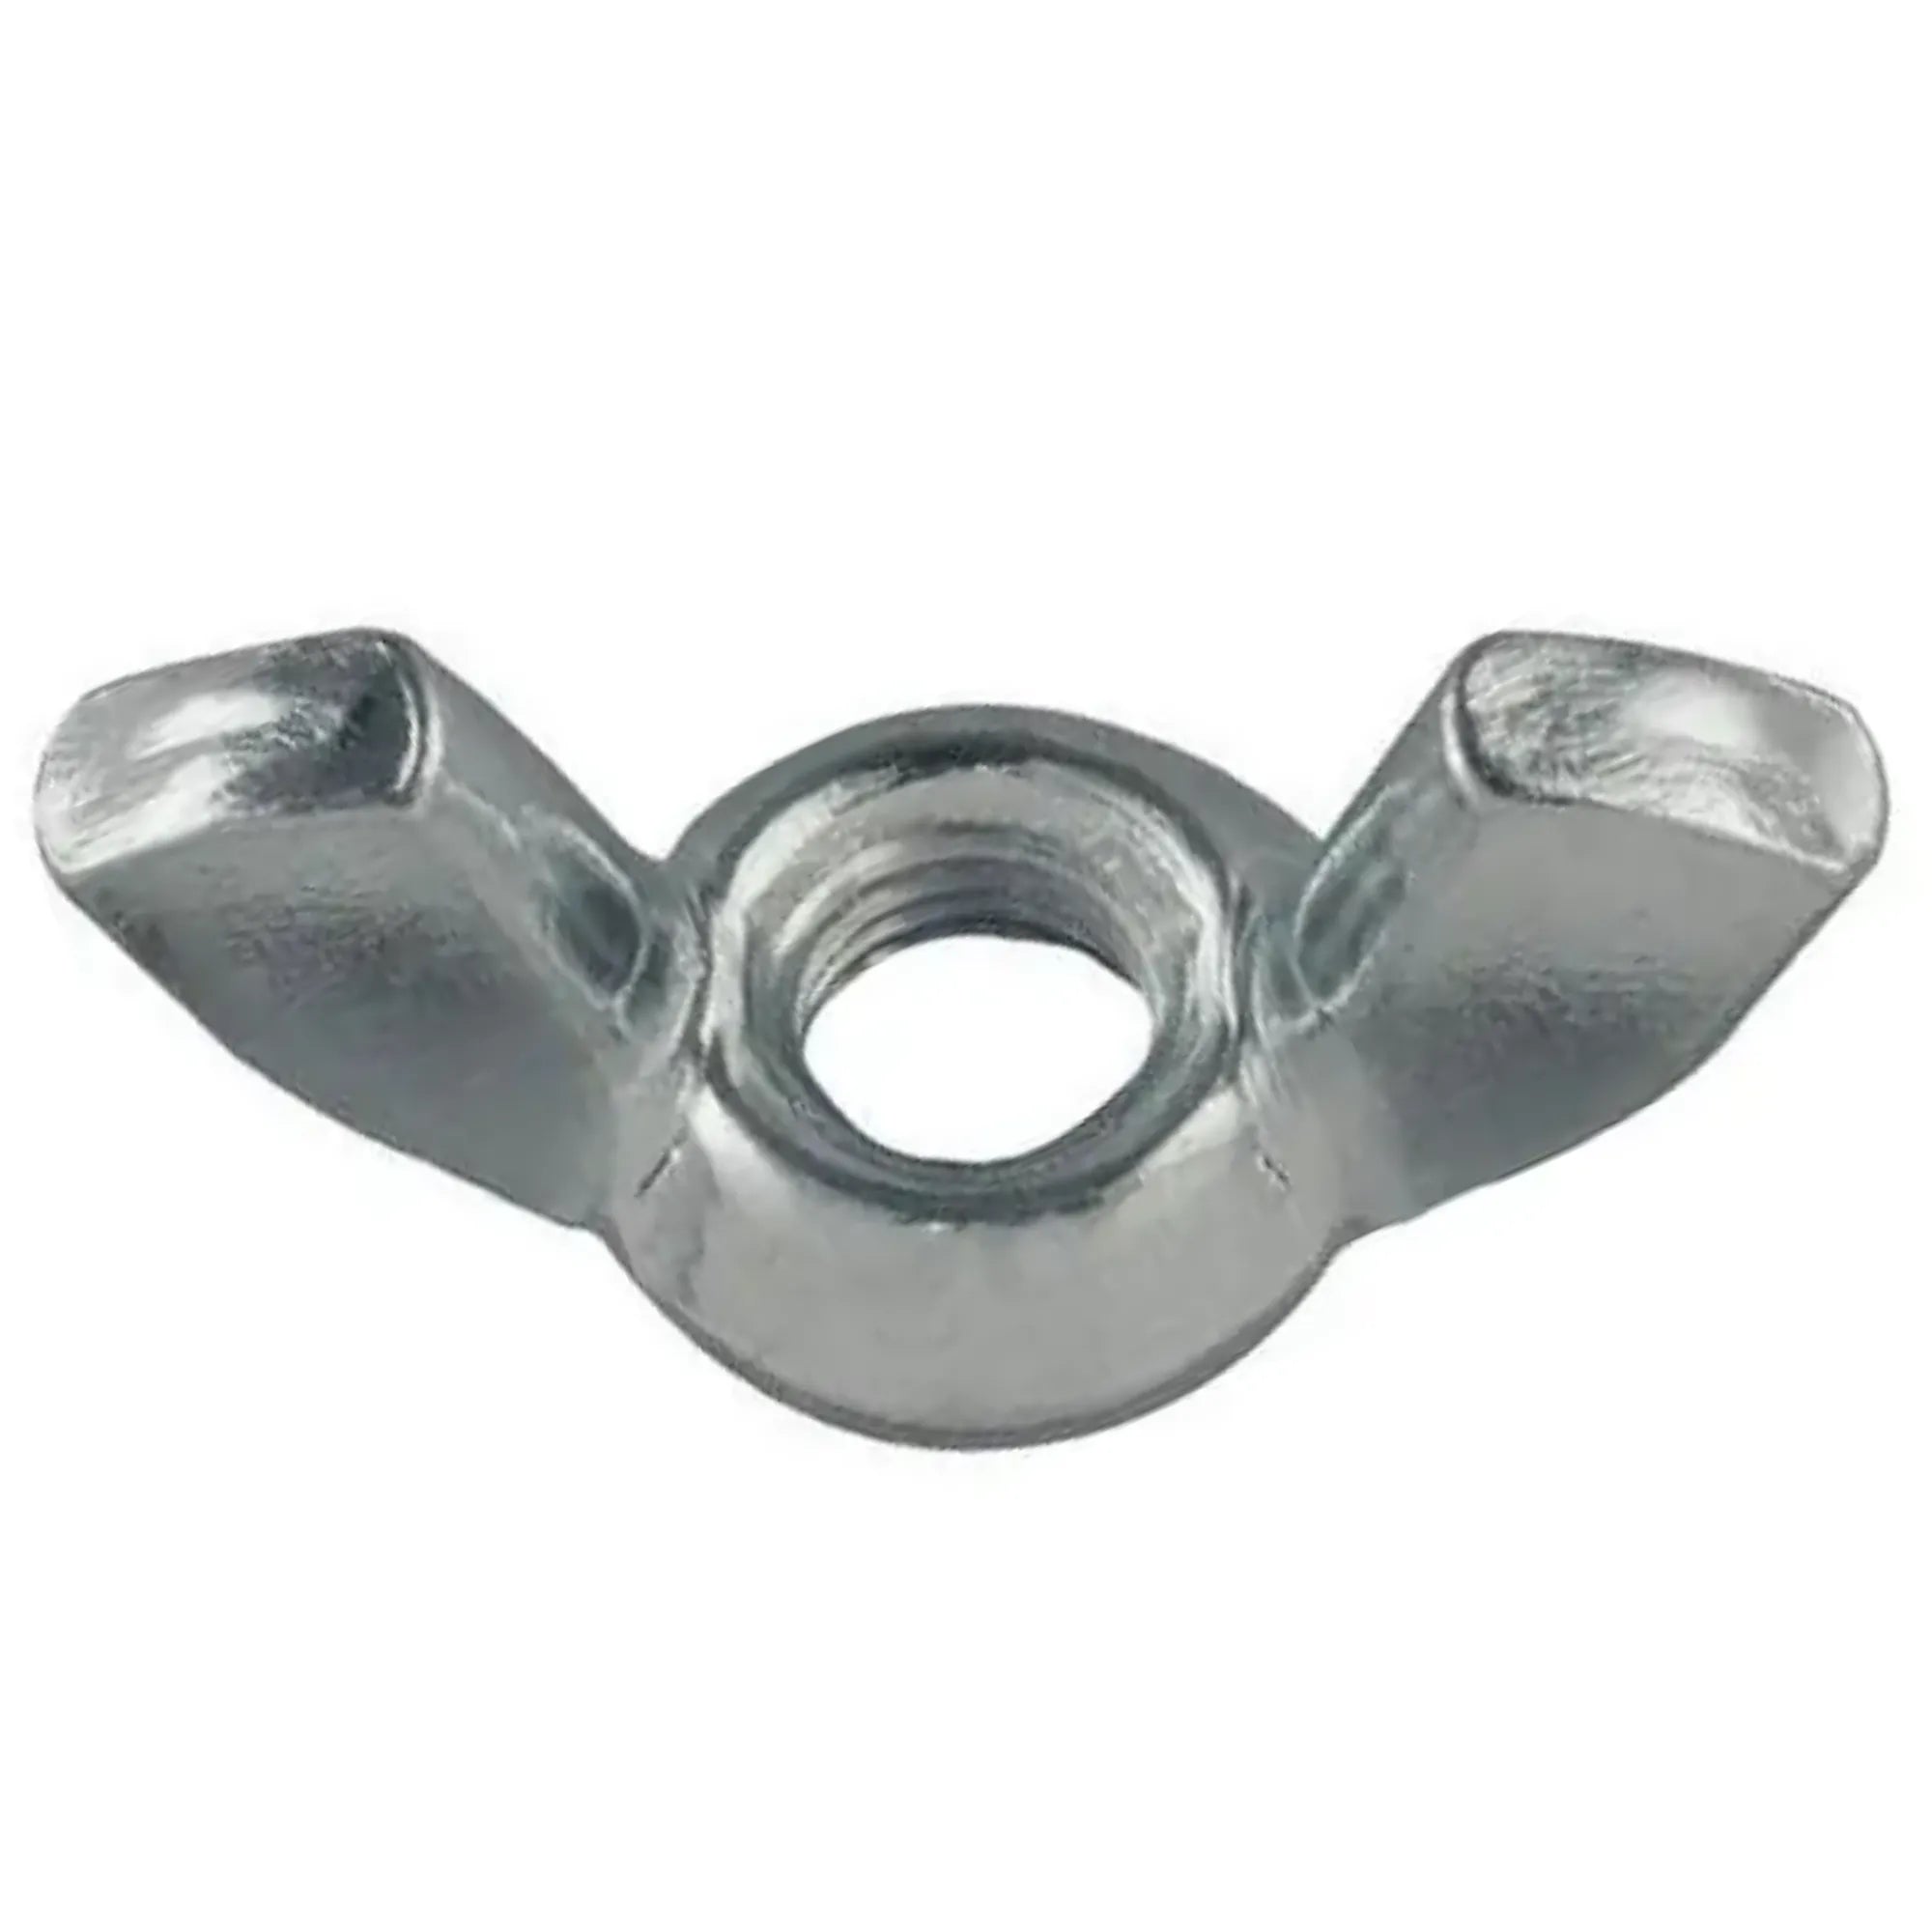 A4 S/S Wing Nuts